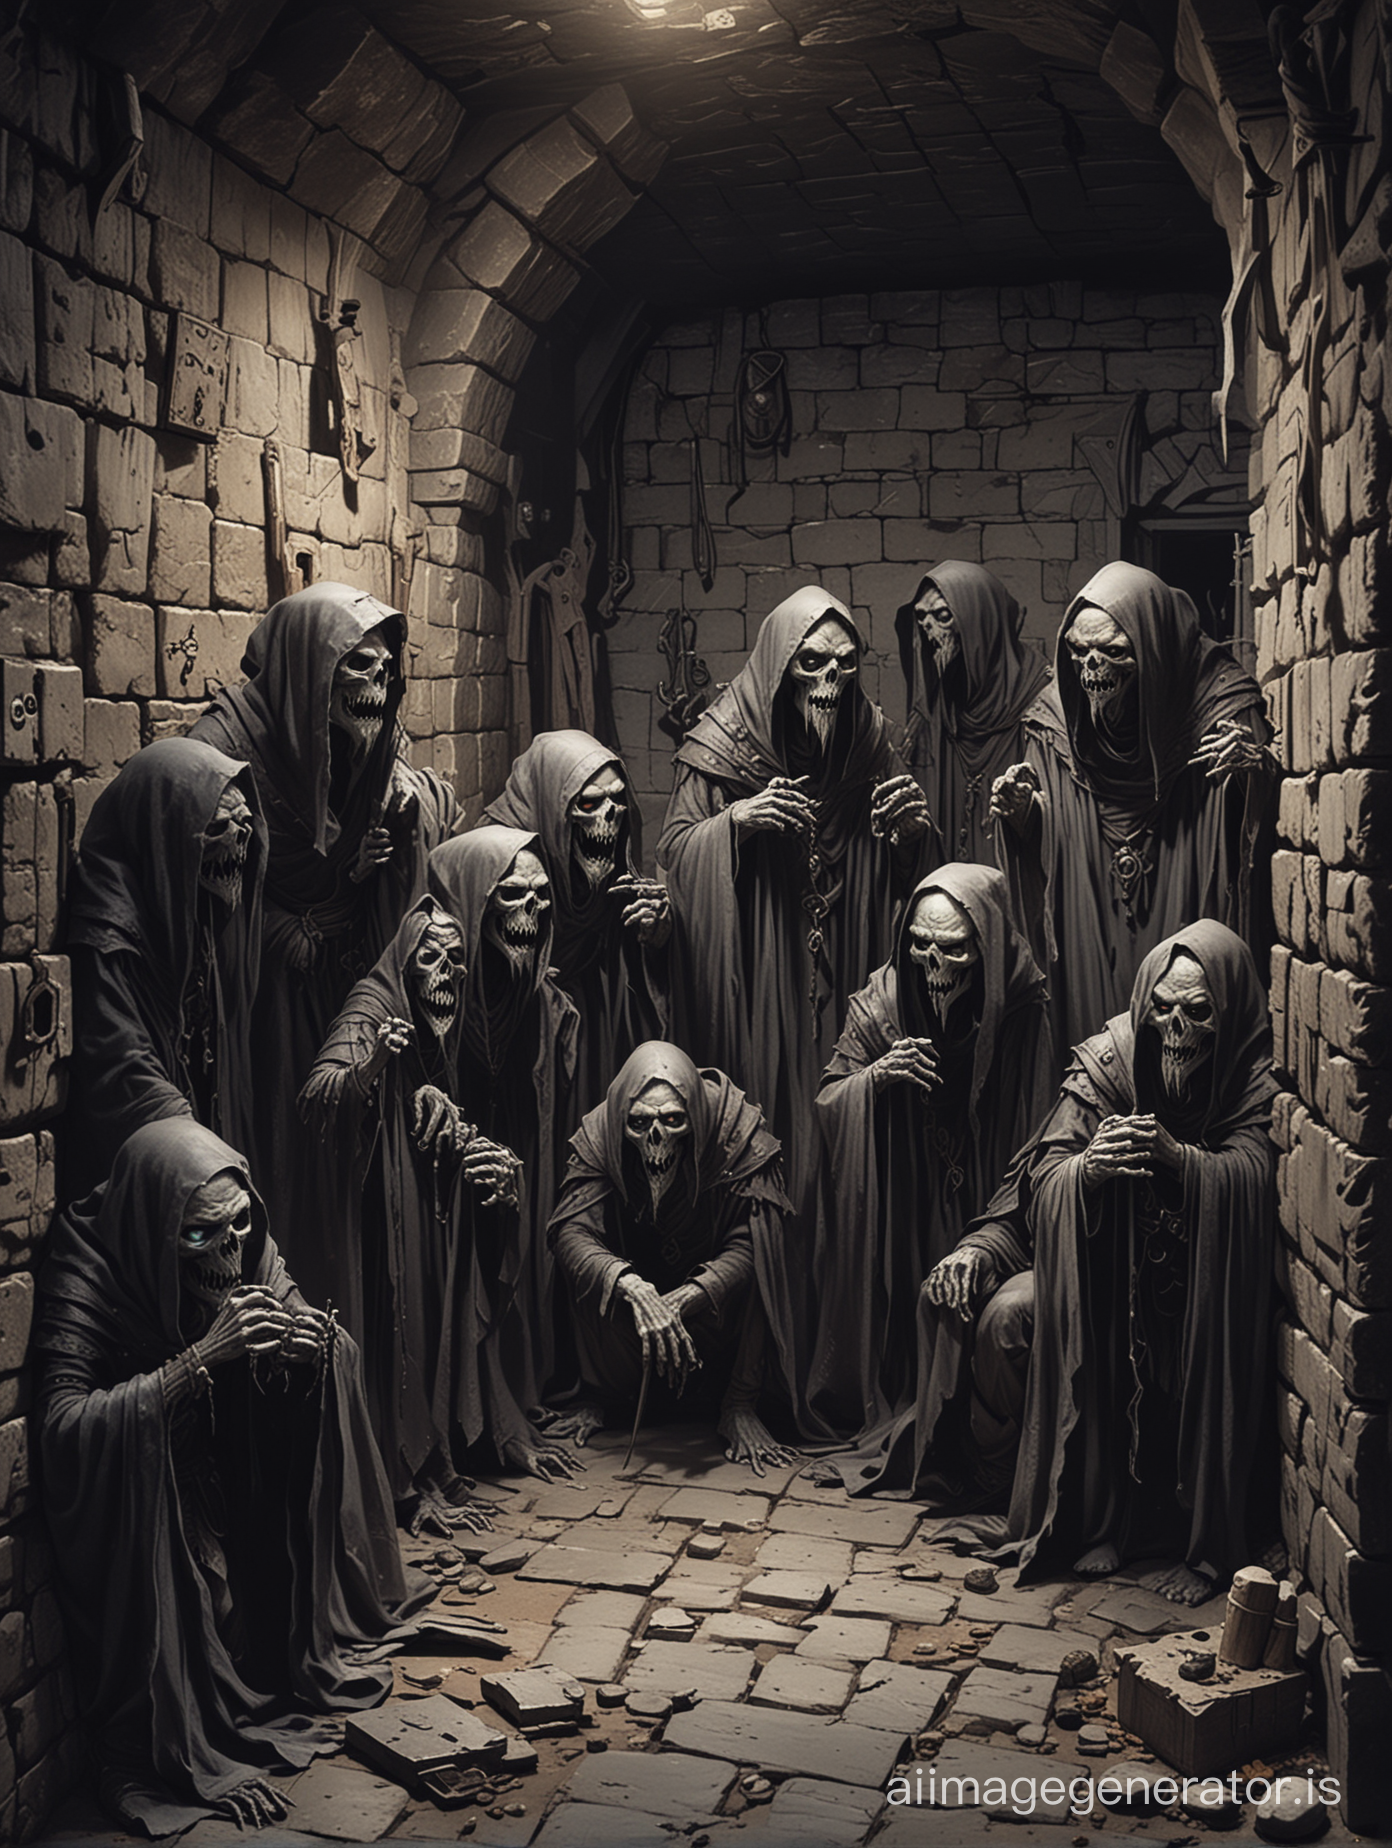 DnD type ghouls hiding in a dungeon room